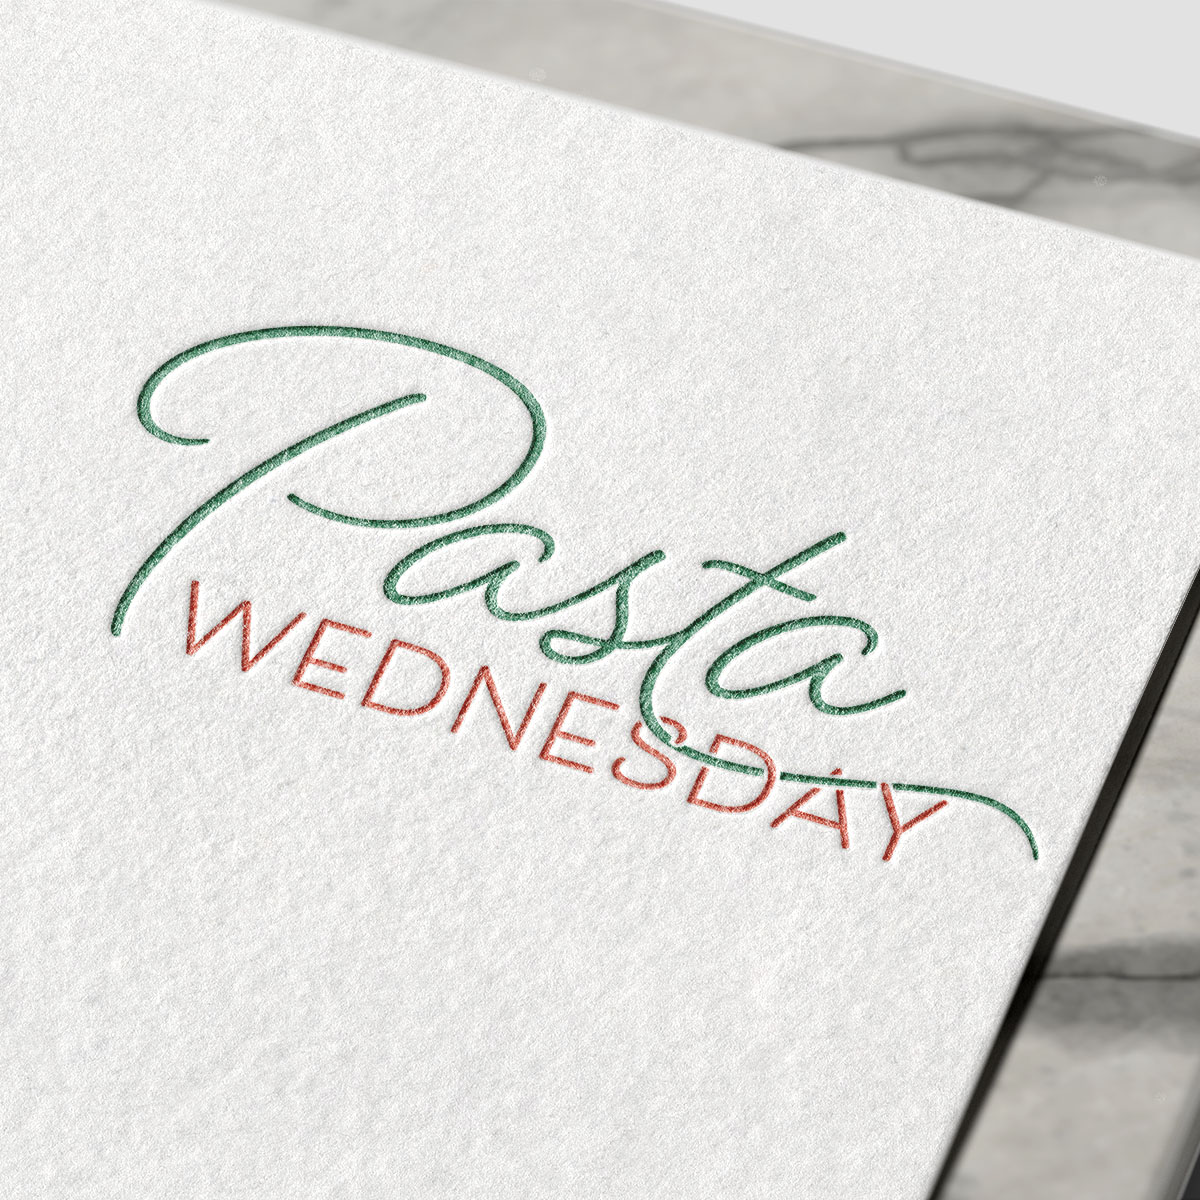 Pasta Wednesday logo as printed on a business card